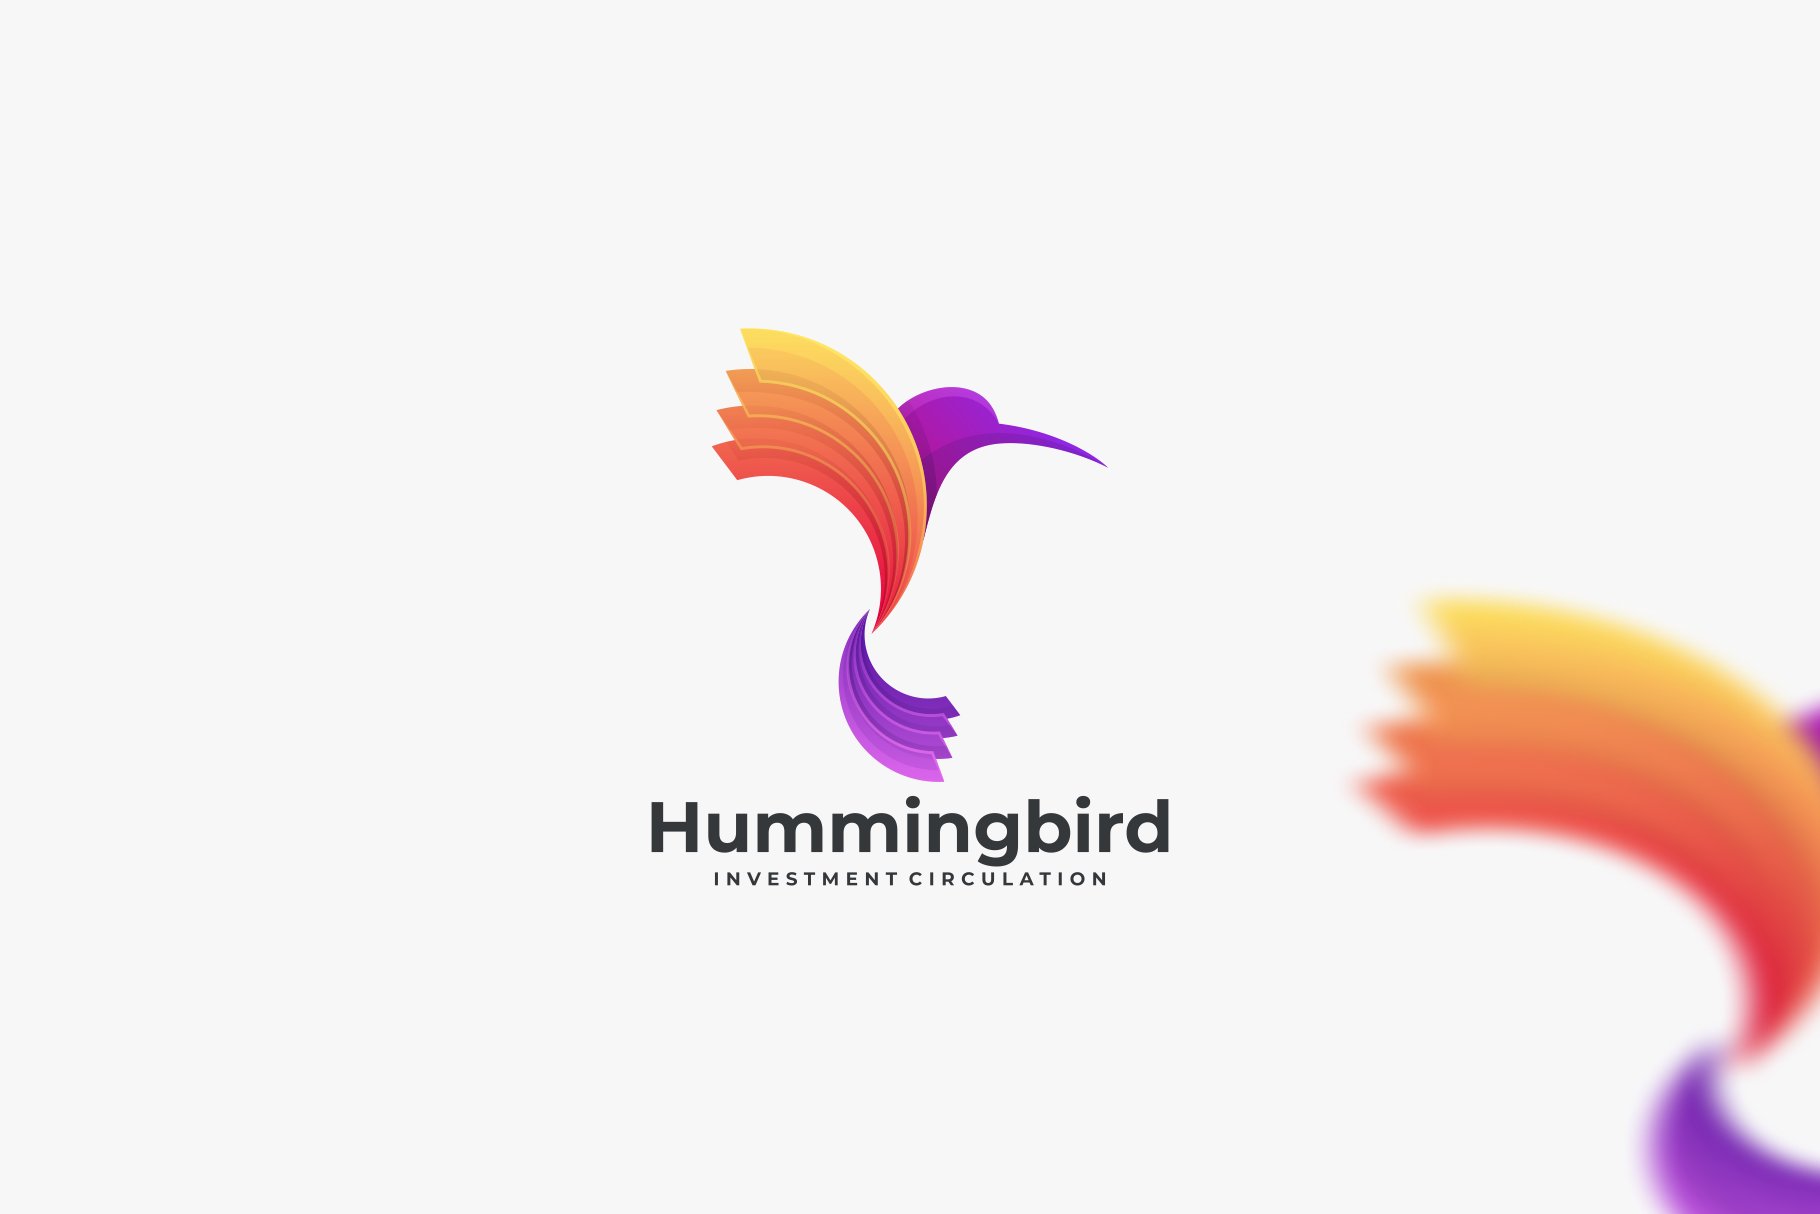 Humming Bird Gradient Color Logo cover image.